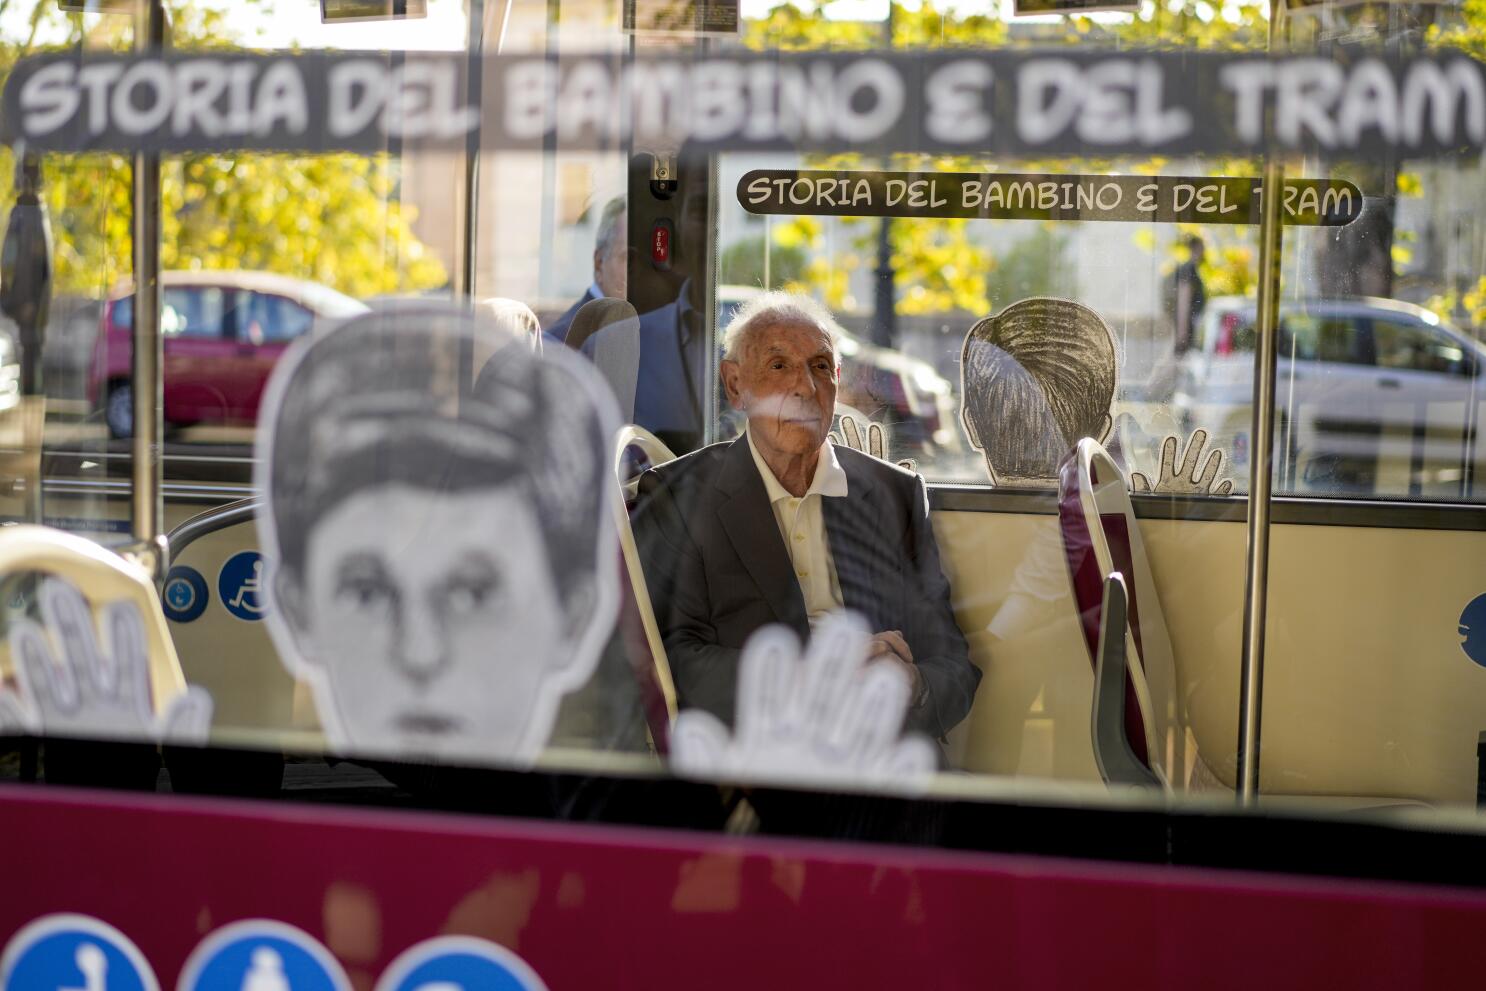 Rome buses recount story of a Jewish boy who avoided Nazi deportation by  riding tram. He's now 92 - The San Diego Union-Tribune